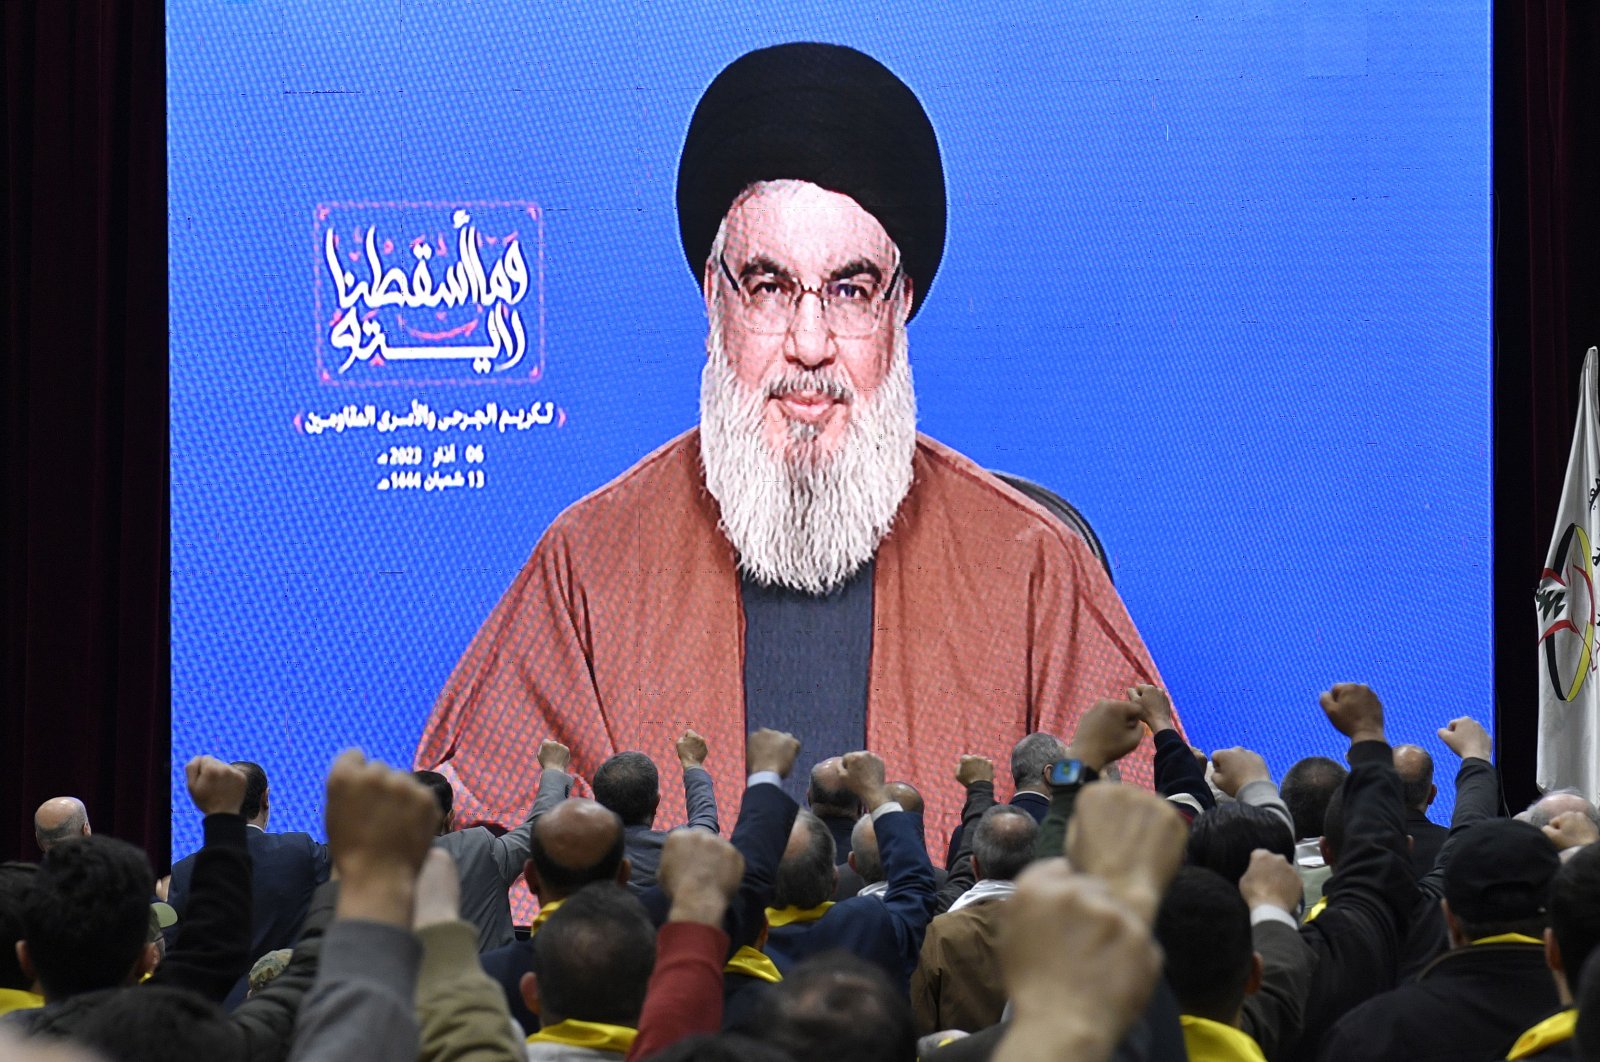 Supporters of Hezbollah listen to a speech by Hezbollah leader Sayyed Hassan Nasrallah delivered on a big screen during a rally to commemorate Hezbollah Wounded Resistance Day, Beirut, Lebanon, March 6, 2023. (EPA Photo)